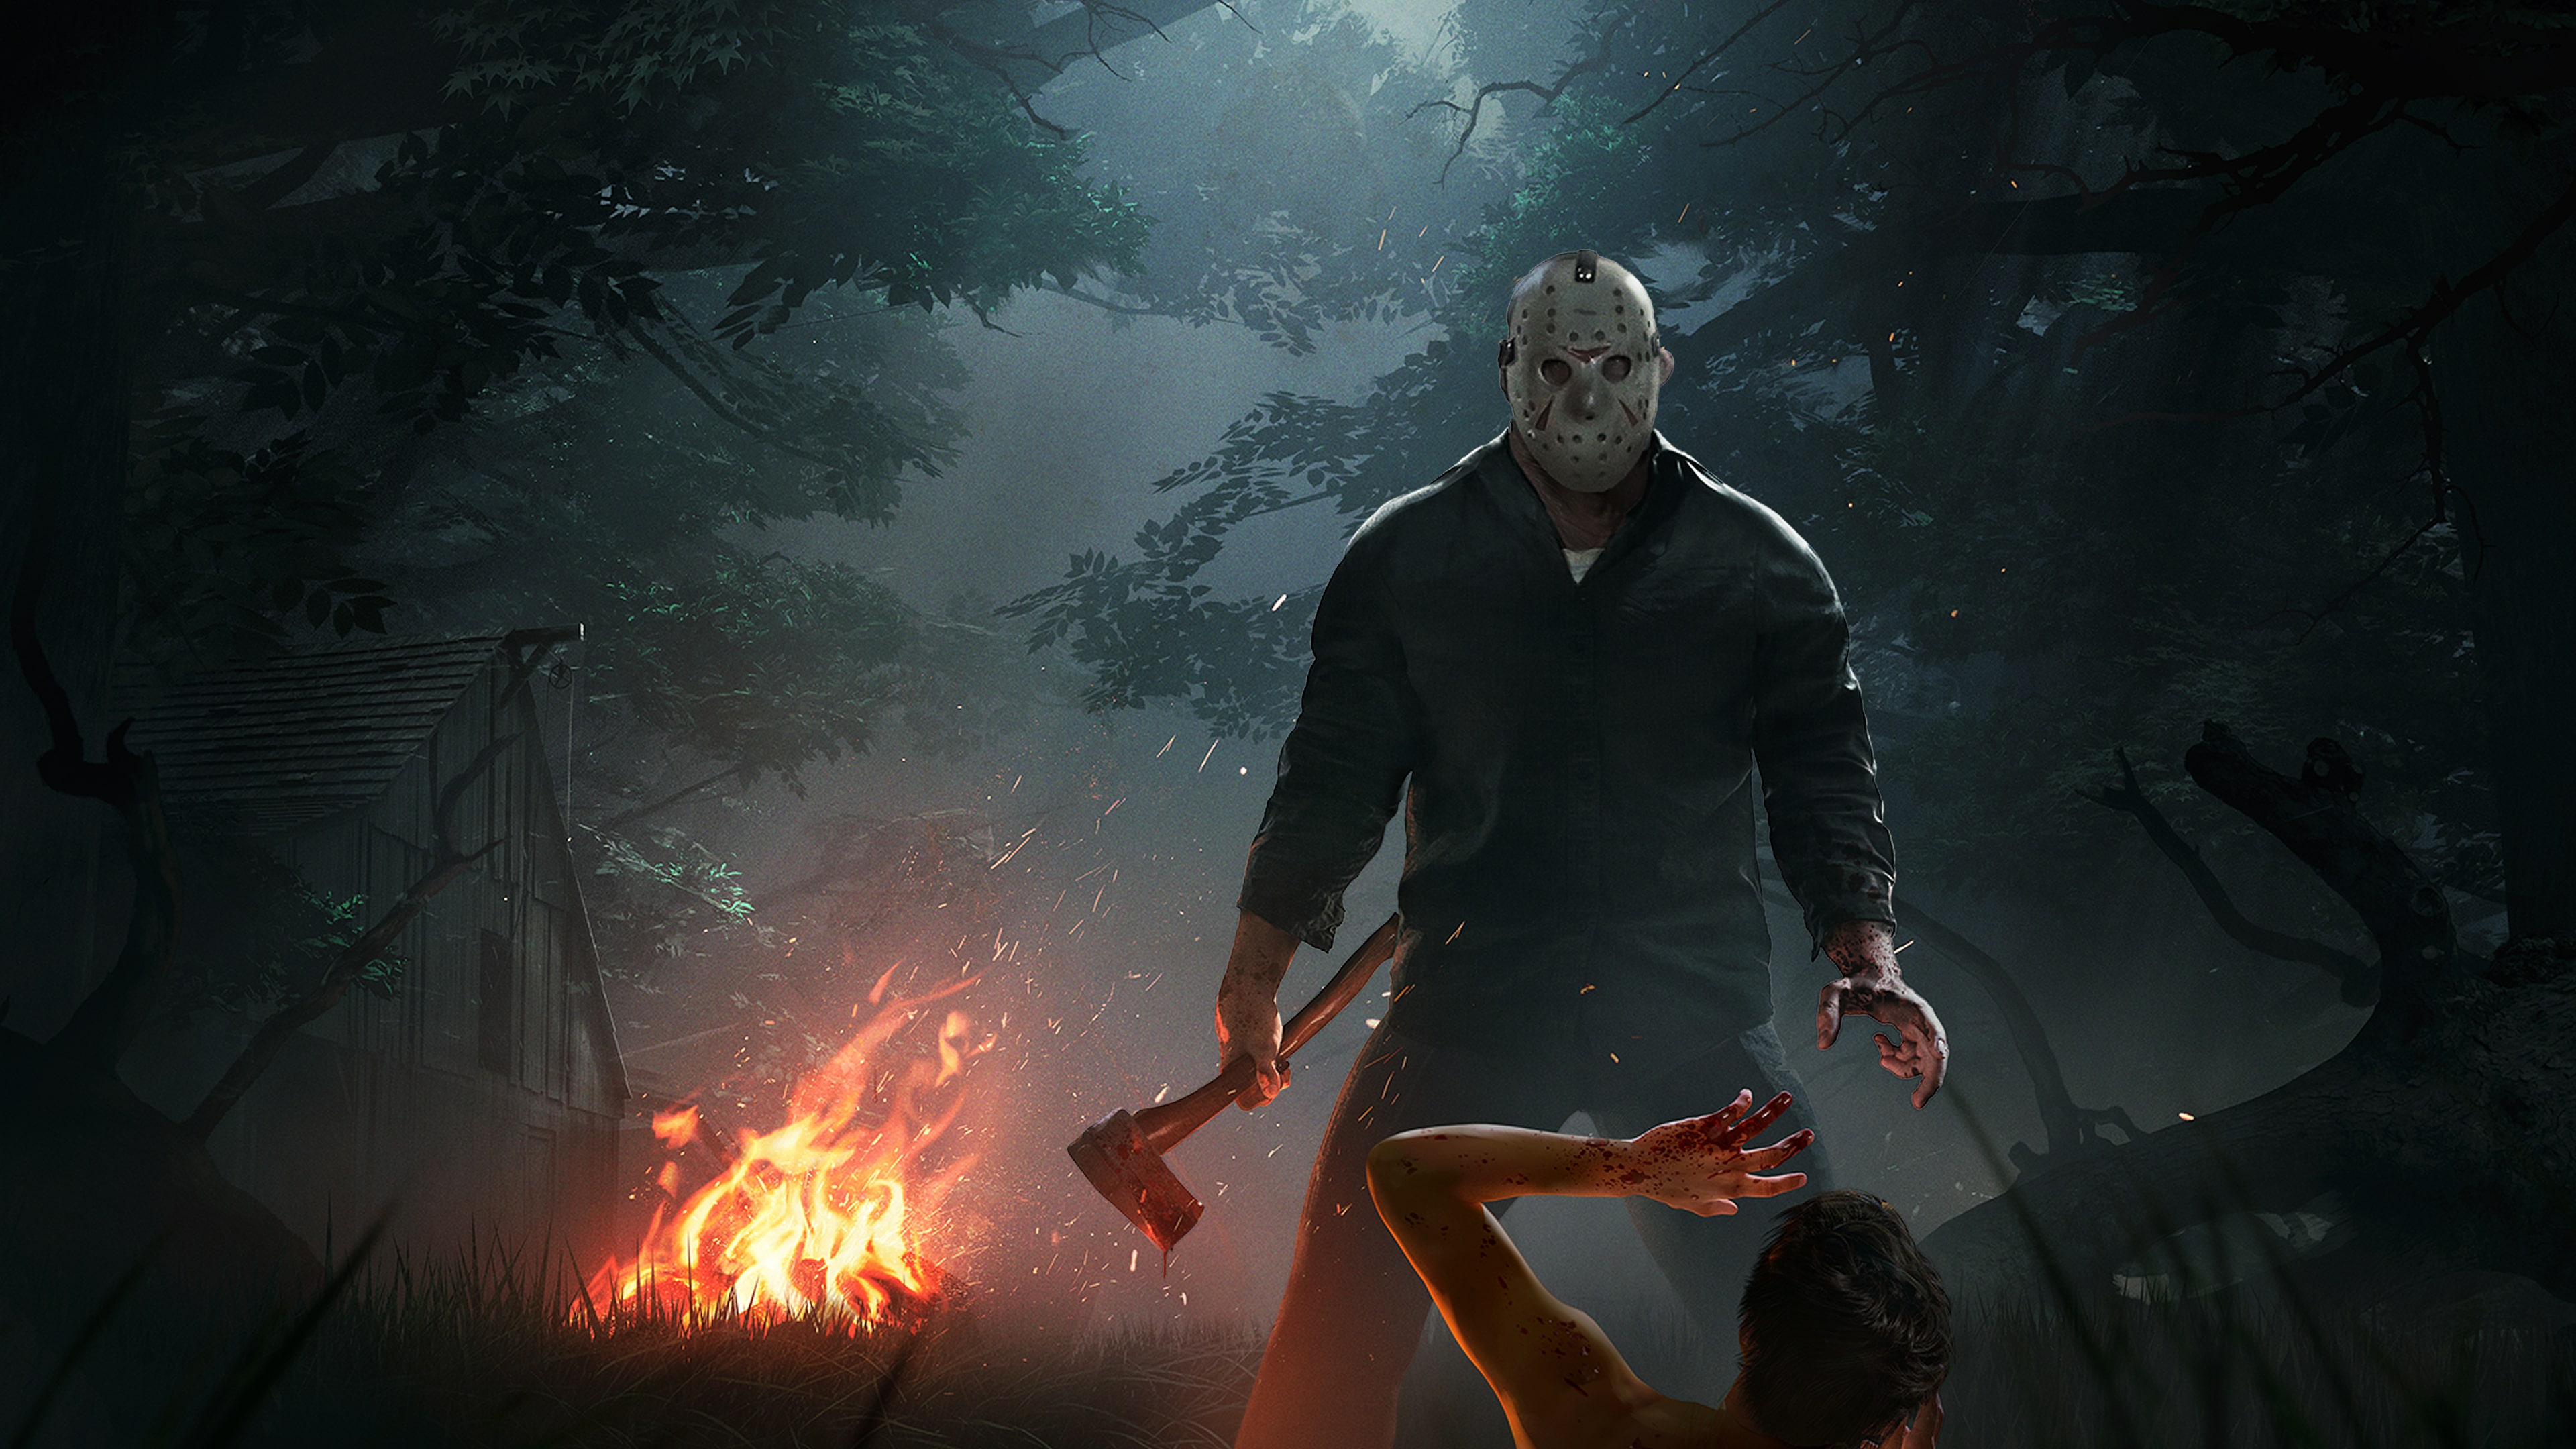 How to Download: Friday the 13th: The Game for FREE in Xbox One